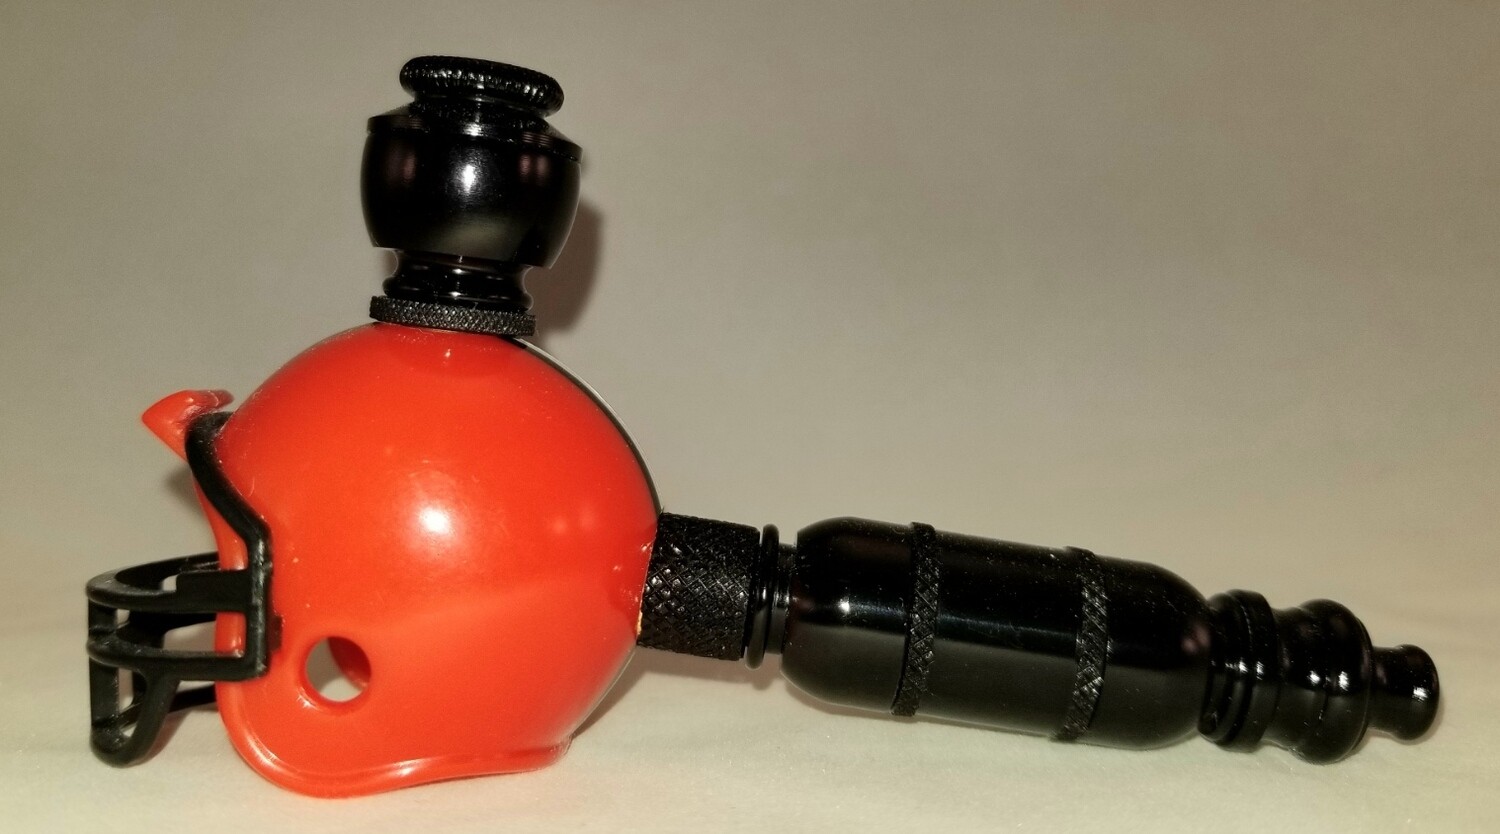 CLEVELAND BROWNS "BAD ASS" NFL FOOTBALL HELMET SMOKING PIPE Small/Straight/Black Anodized